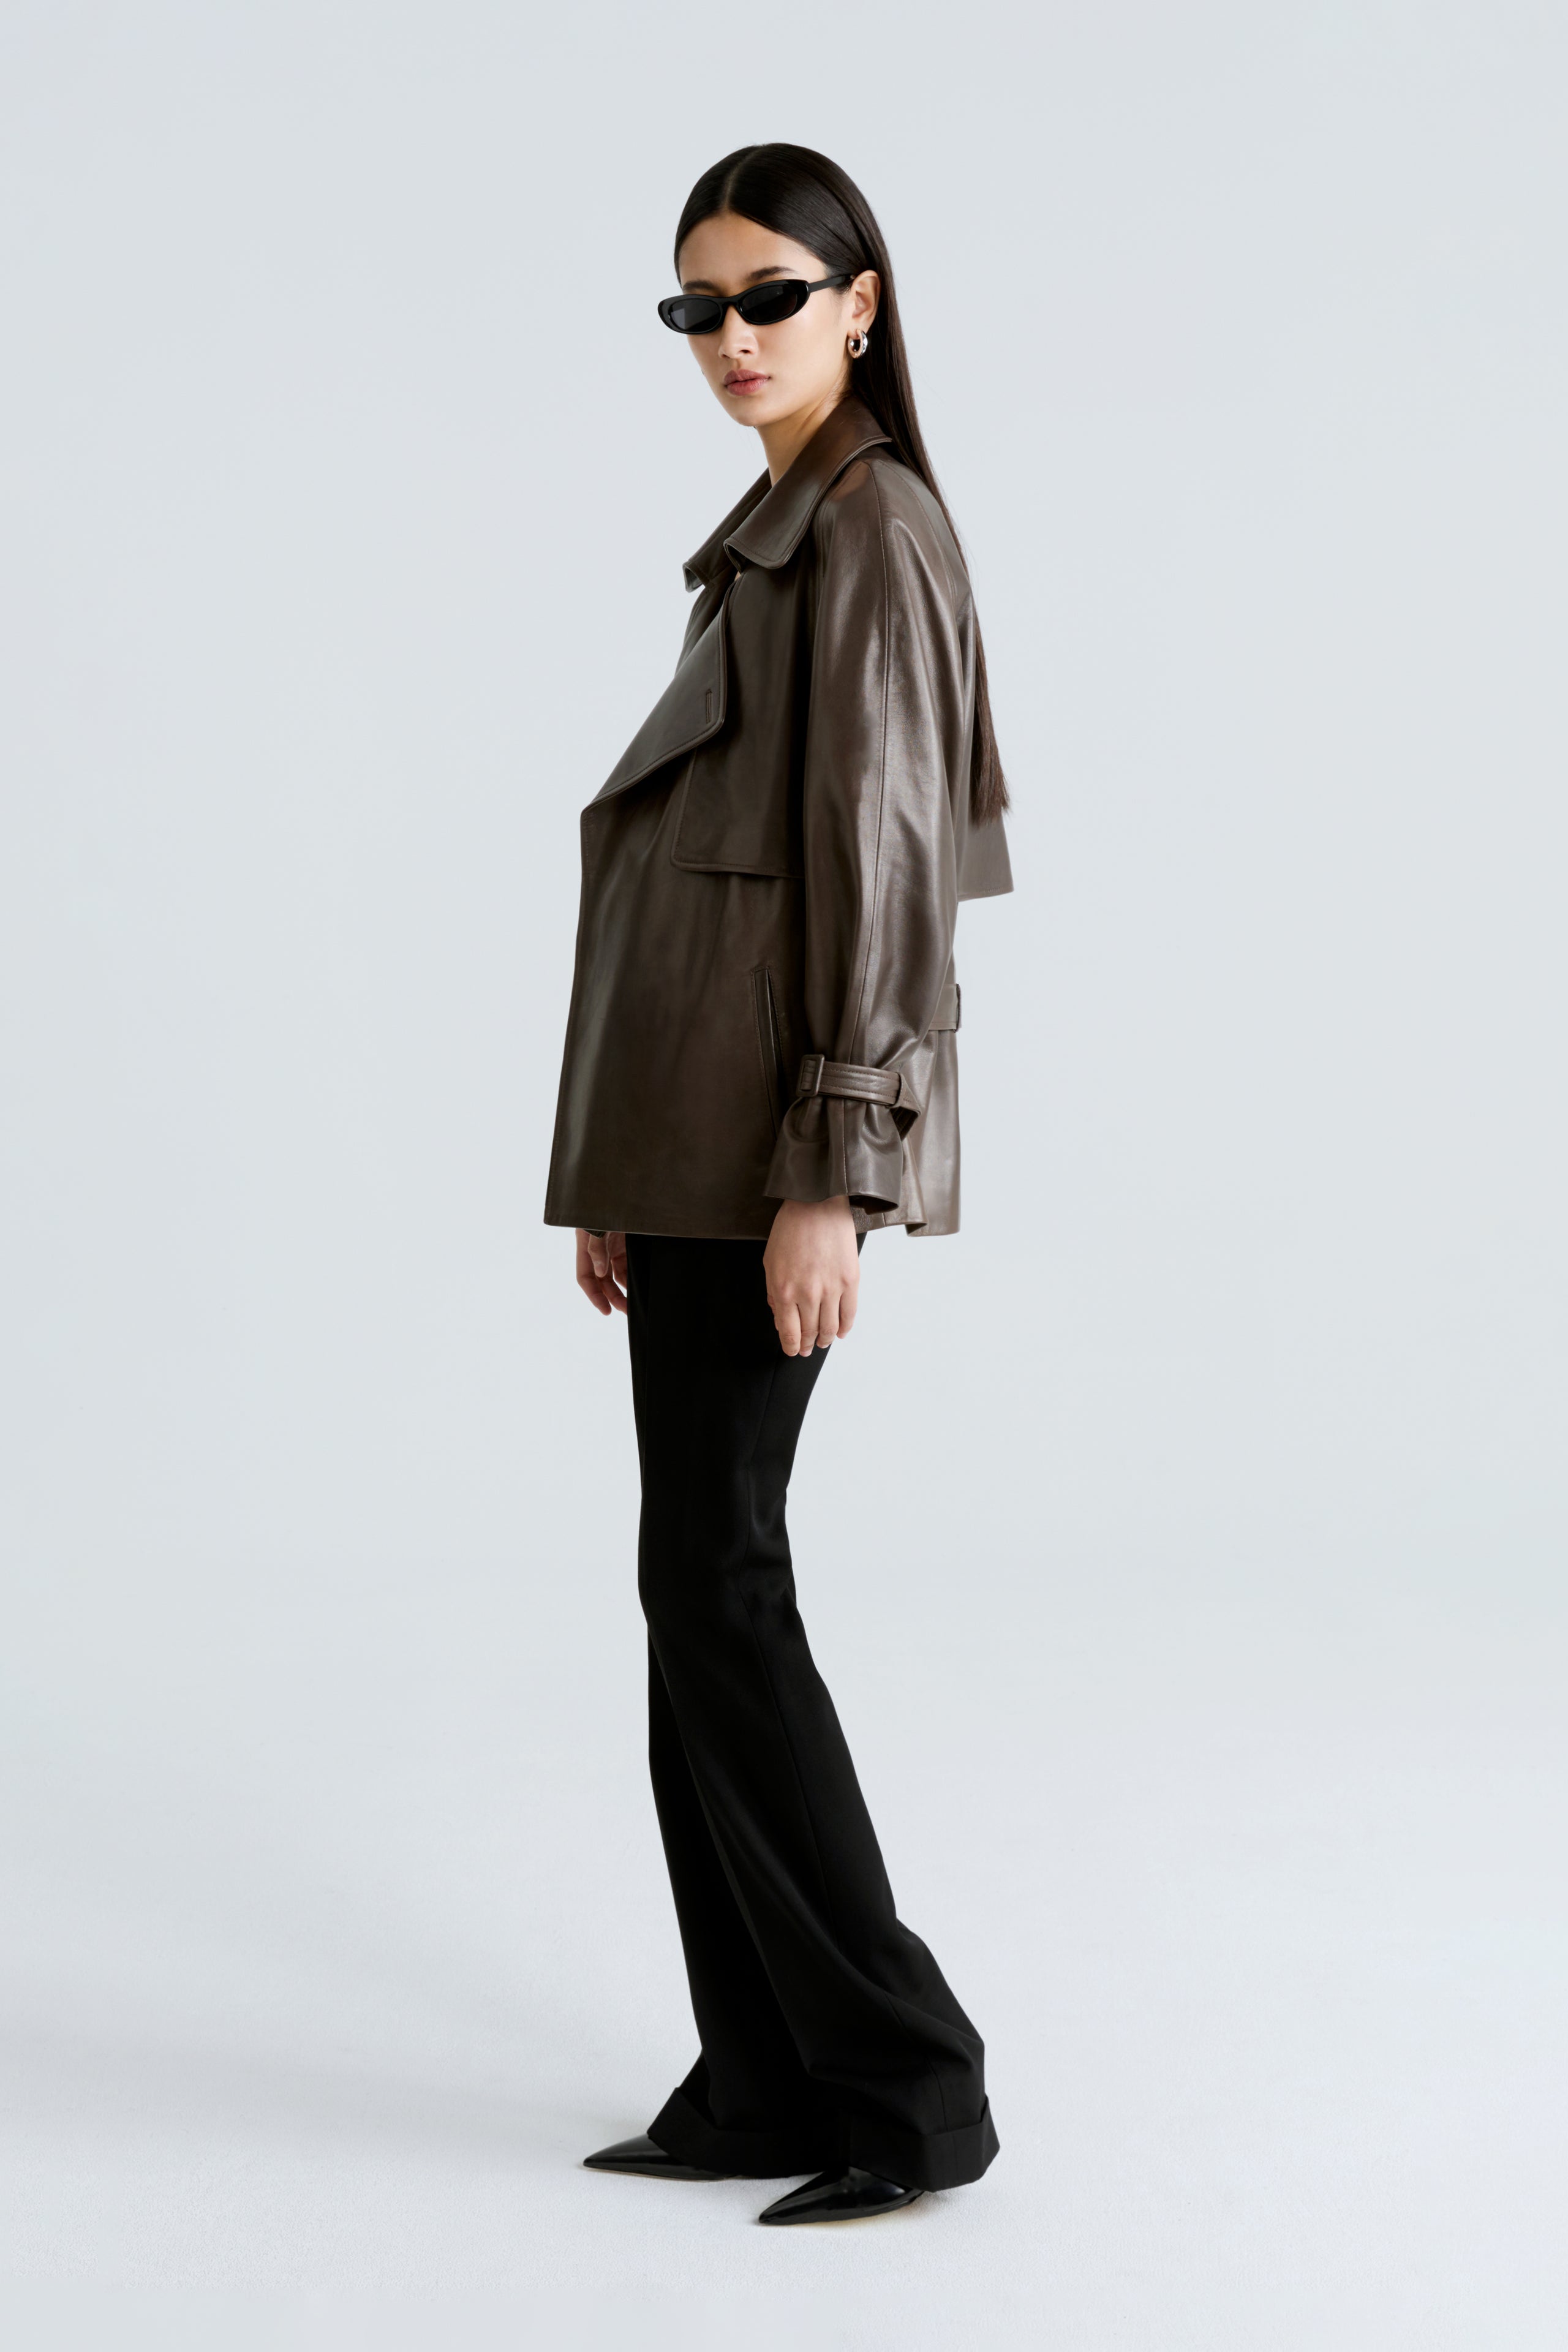 Model is wearing the Brea Truffle Belted Leather Short Trench Side